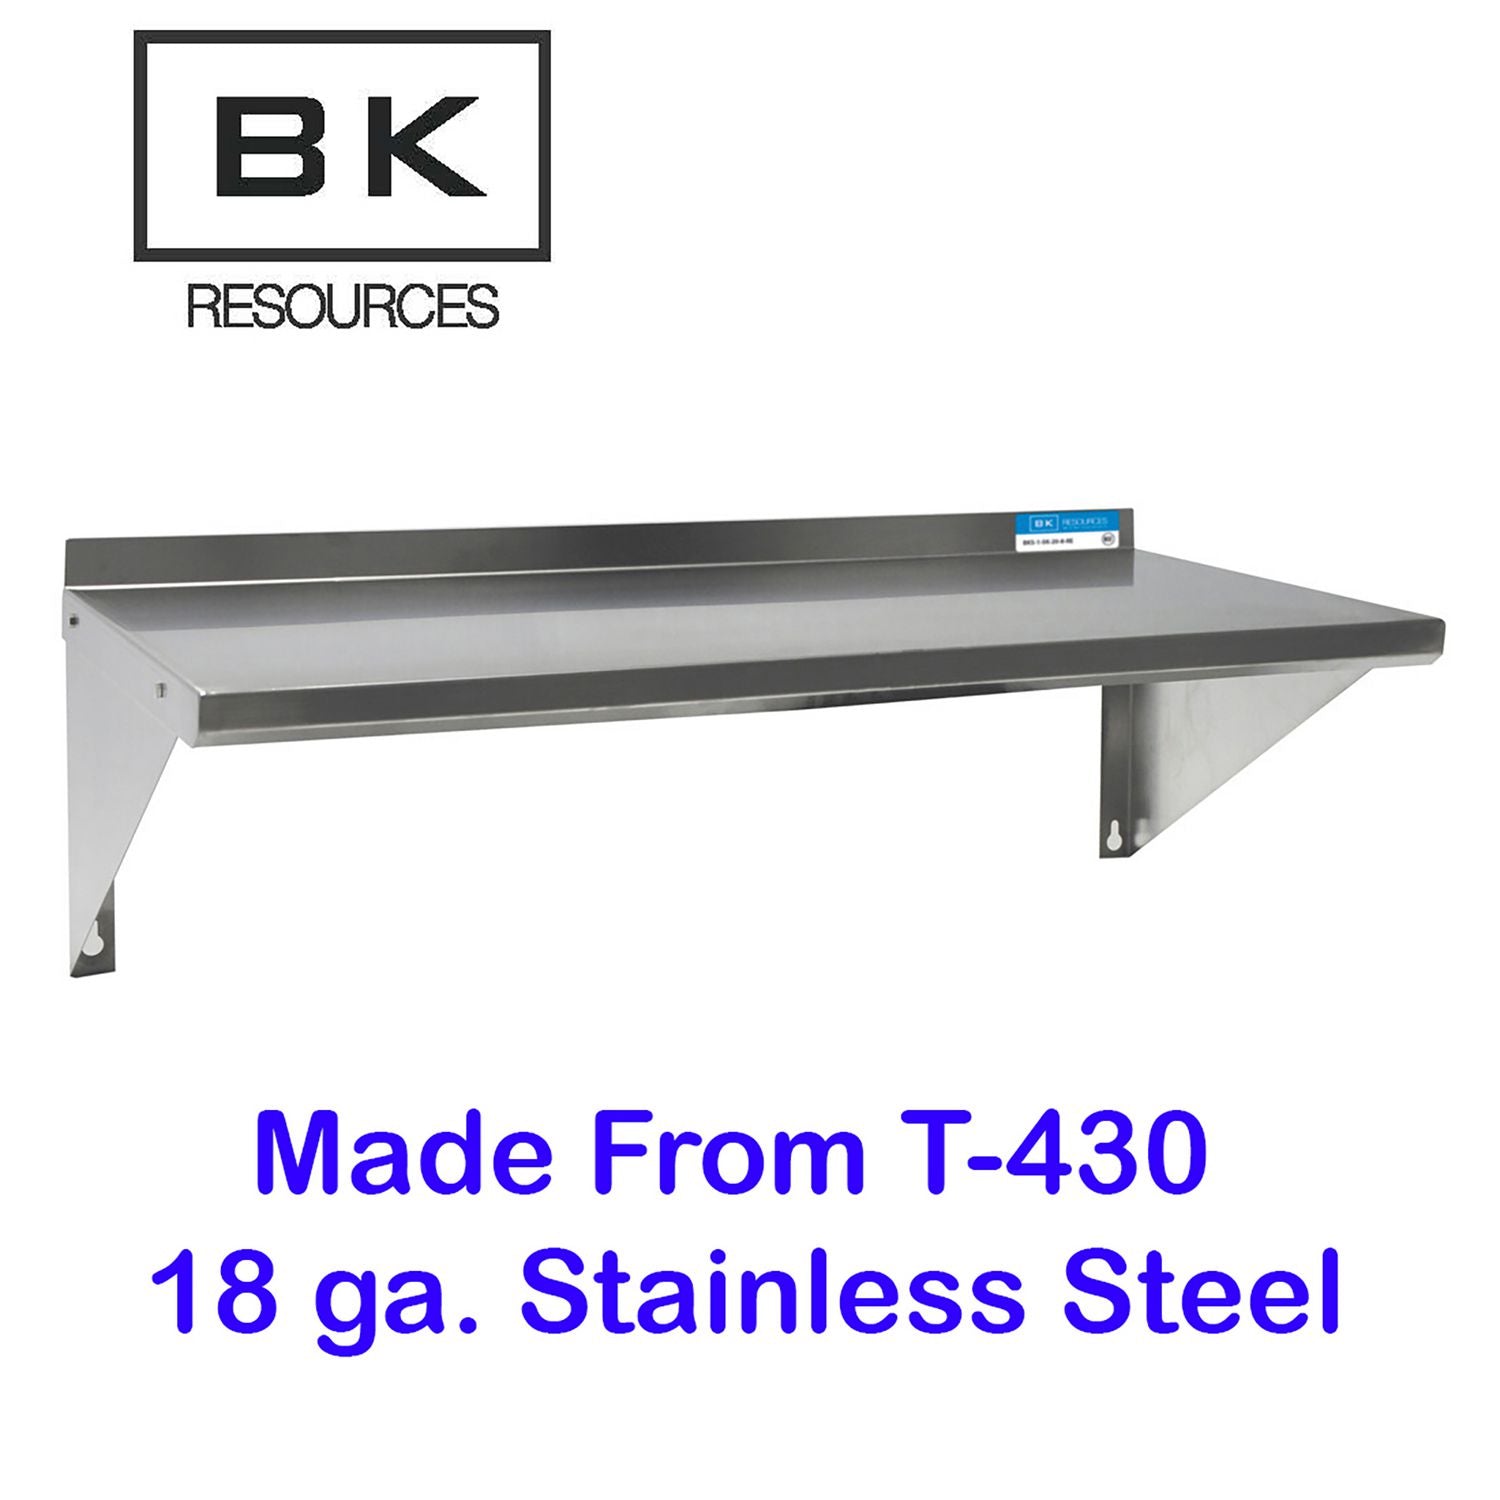 stainless-steel-economy-overshelf-32w-x-16d-x-115h-stainless-steel-silver-2-pallet-ships-in-4-6-business-days_bke2wse1632 - 3